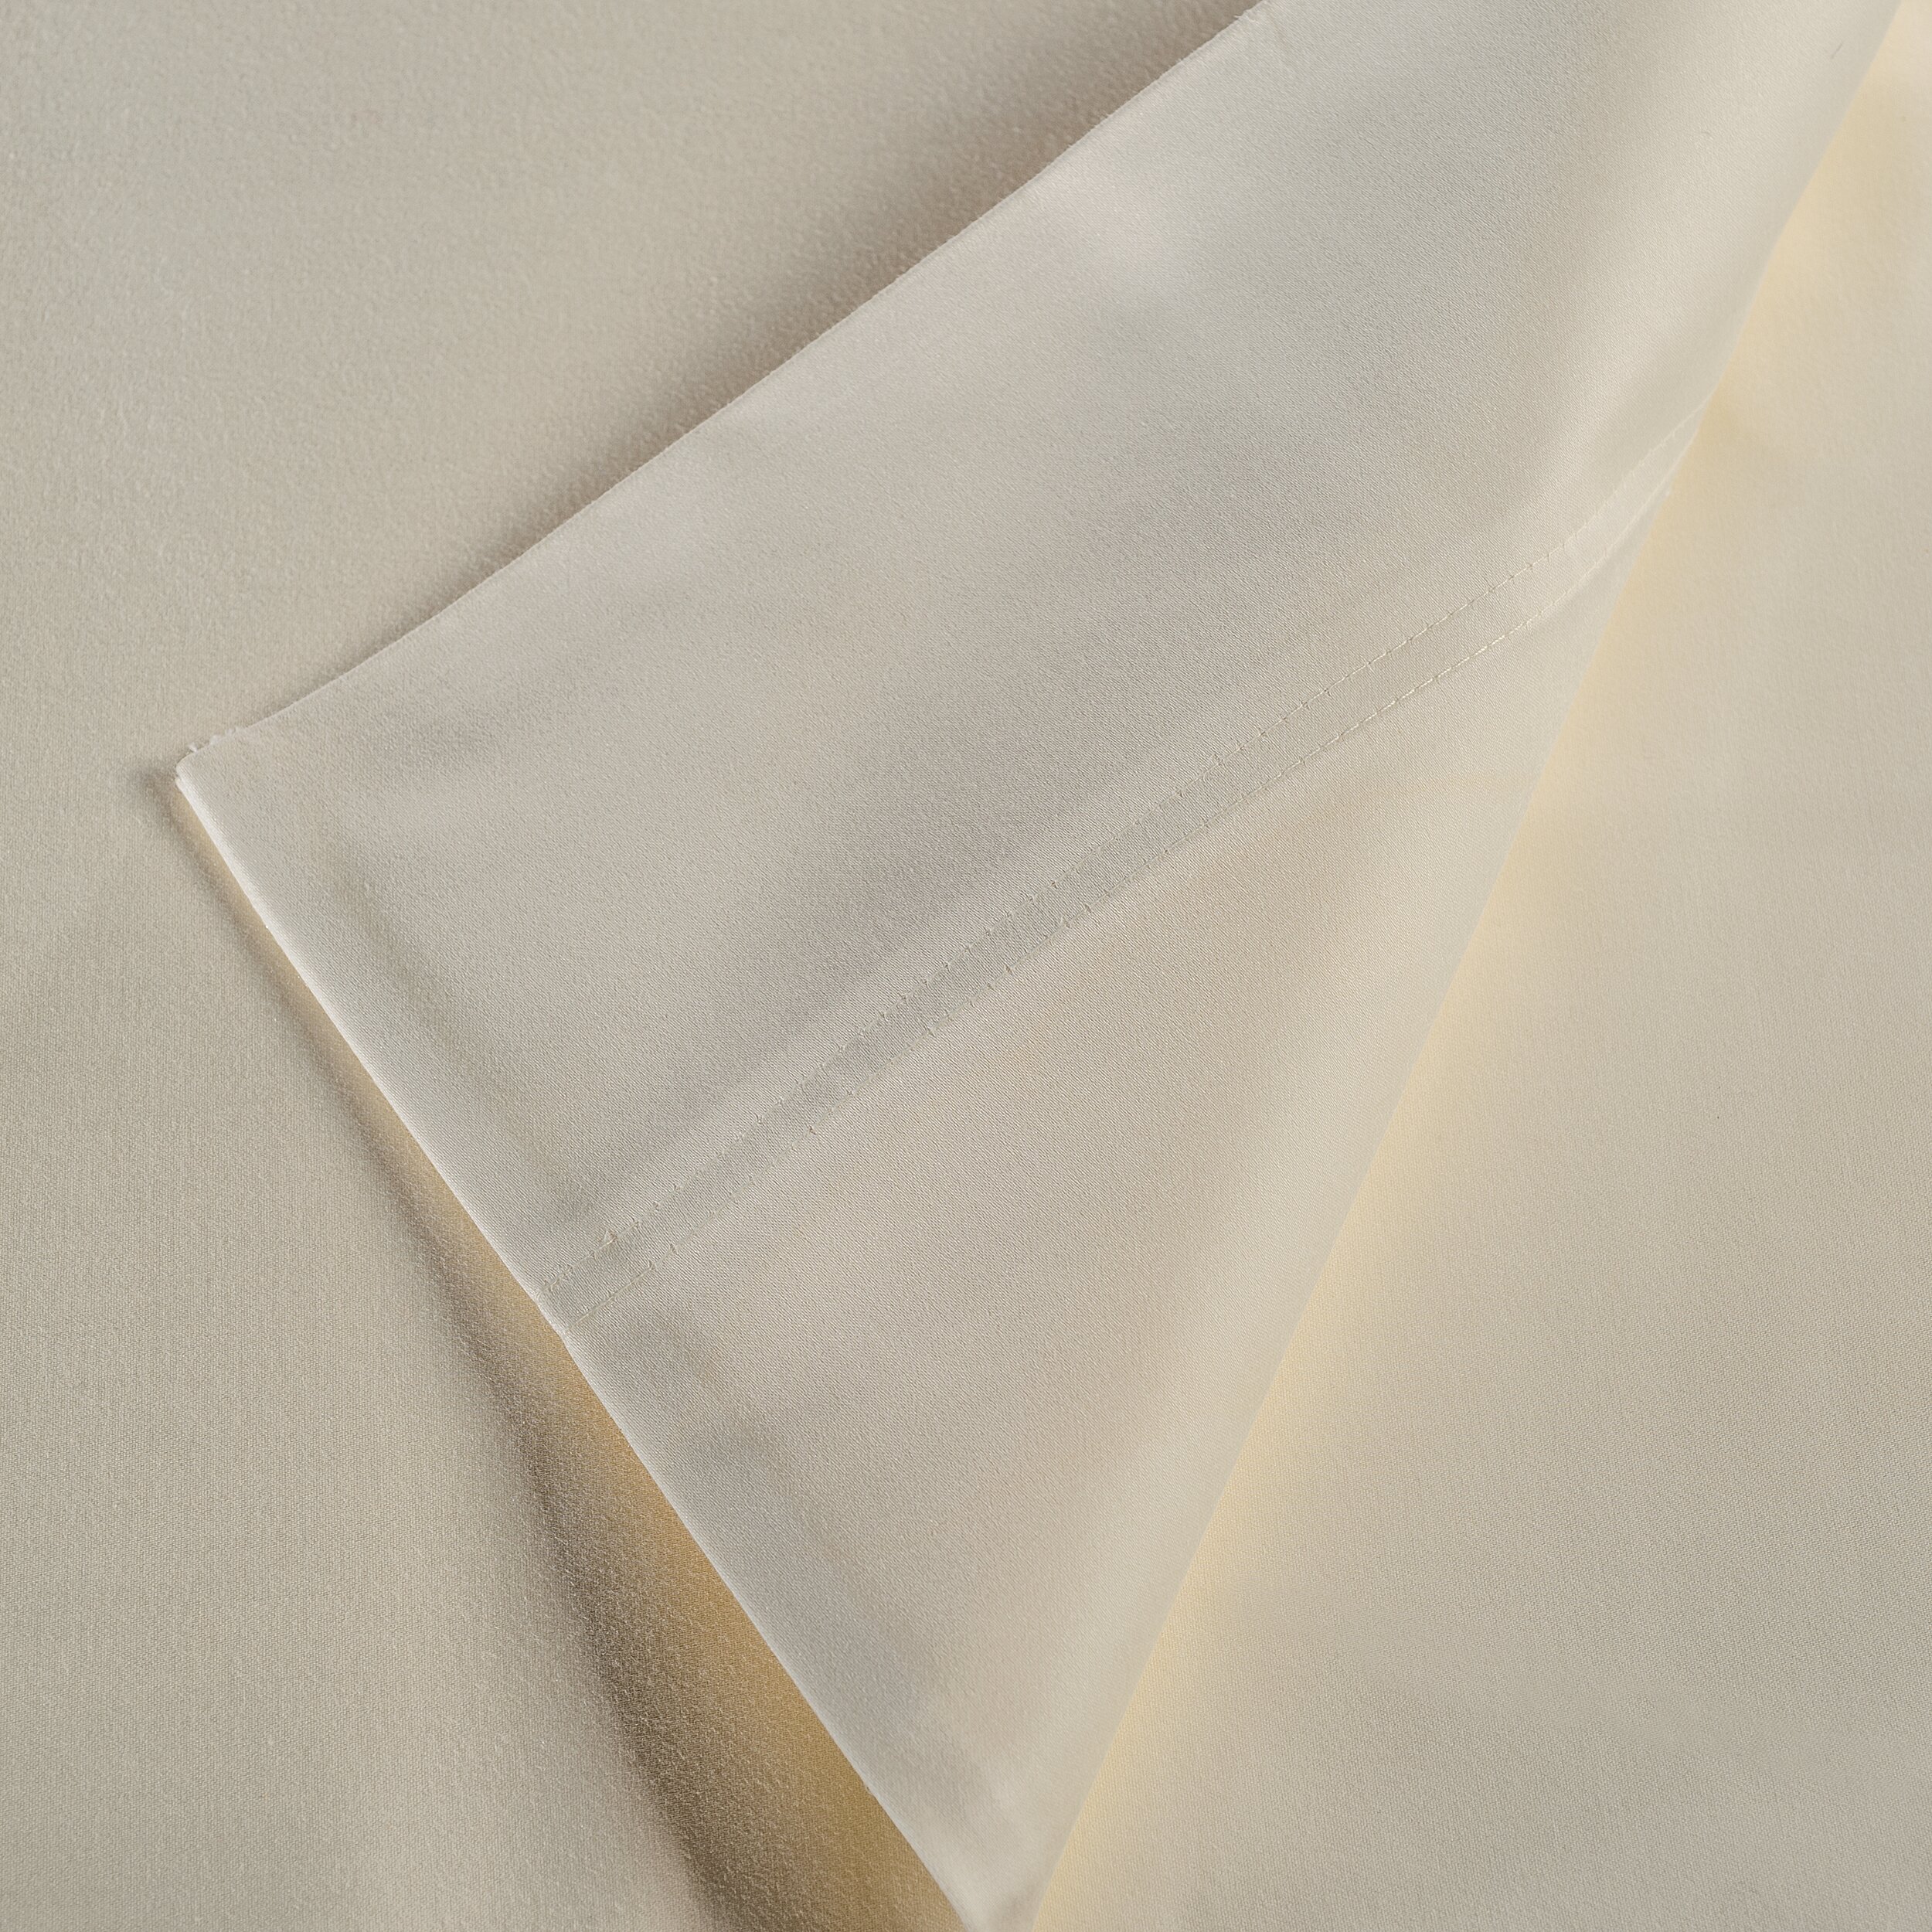 Westport Home 1200 Thread Count Egyptian Quality Cotton Sheet Set ...